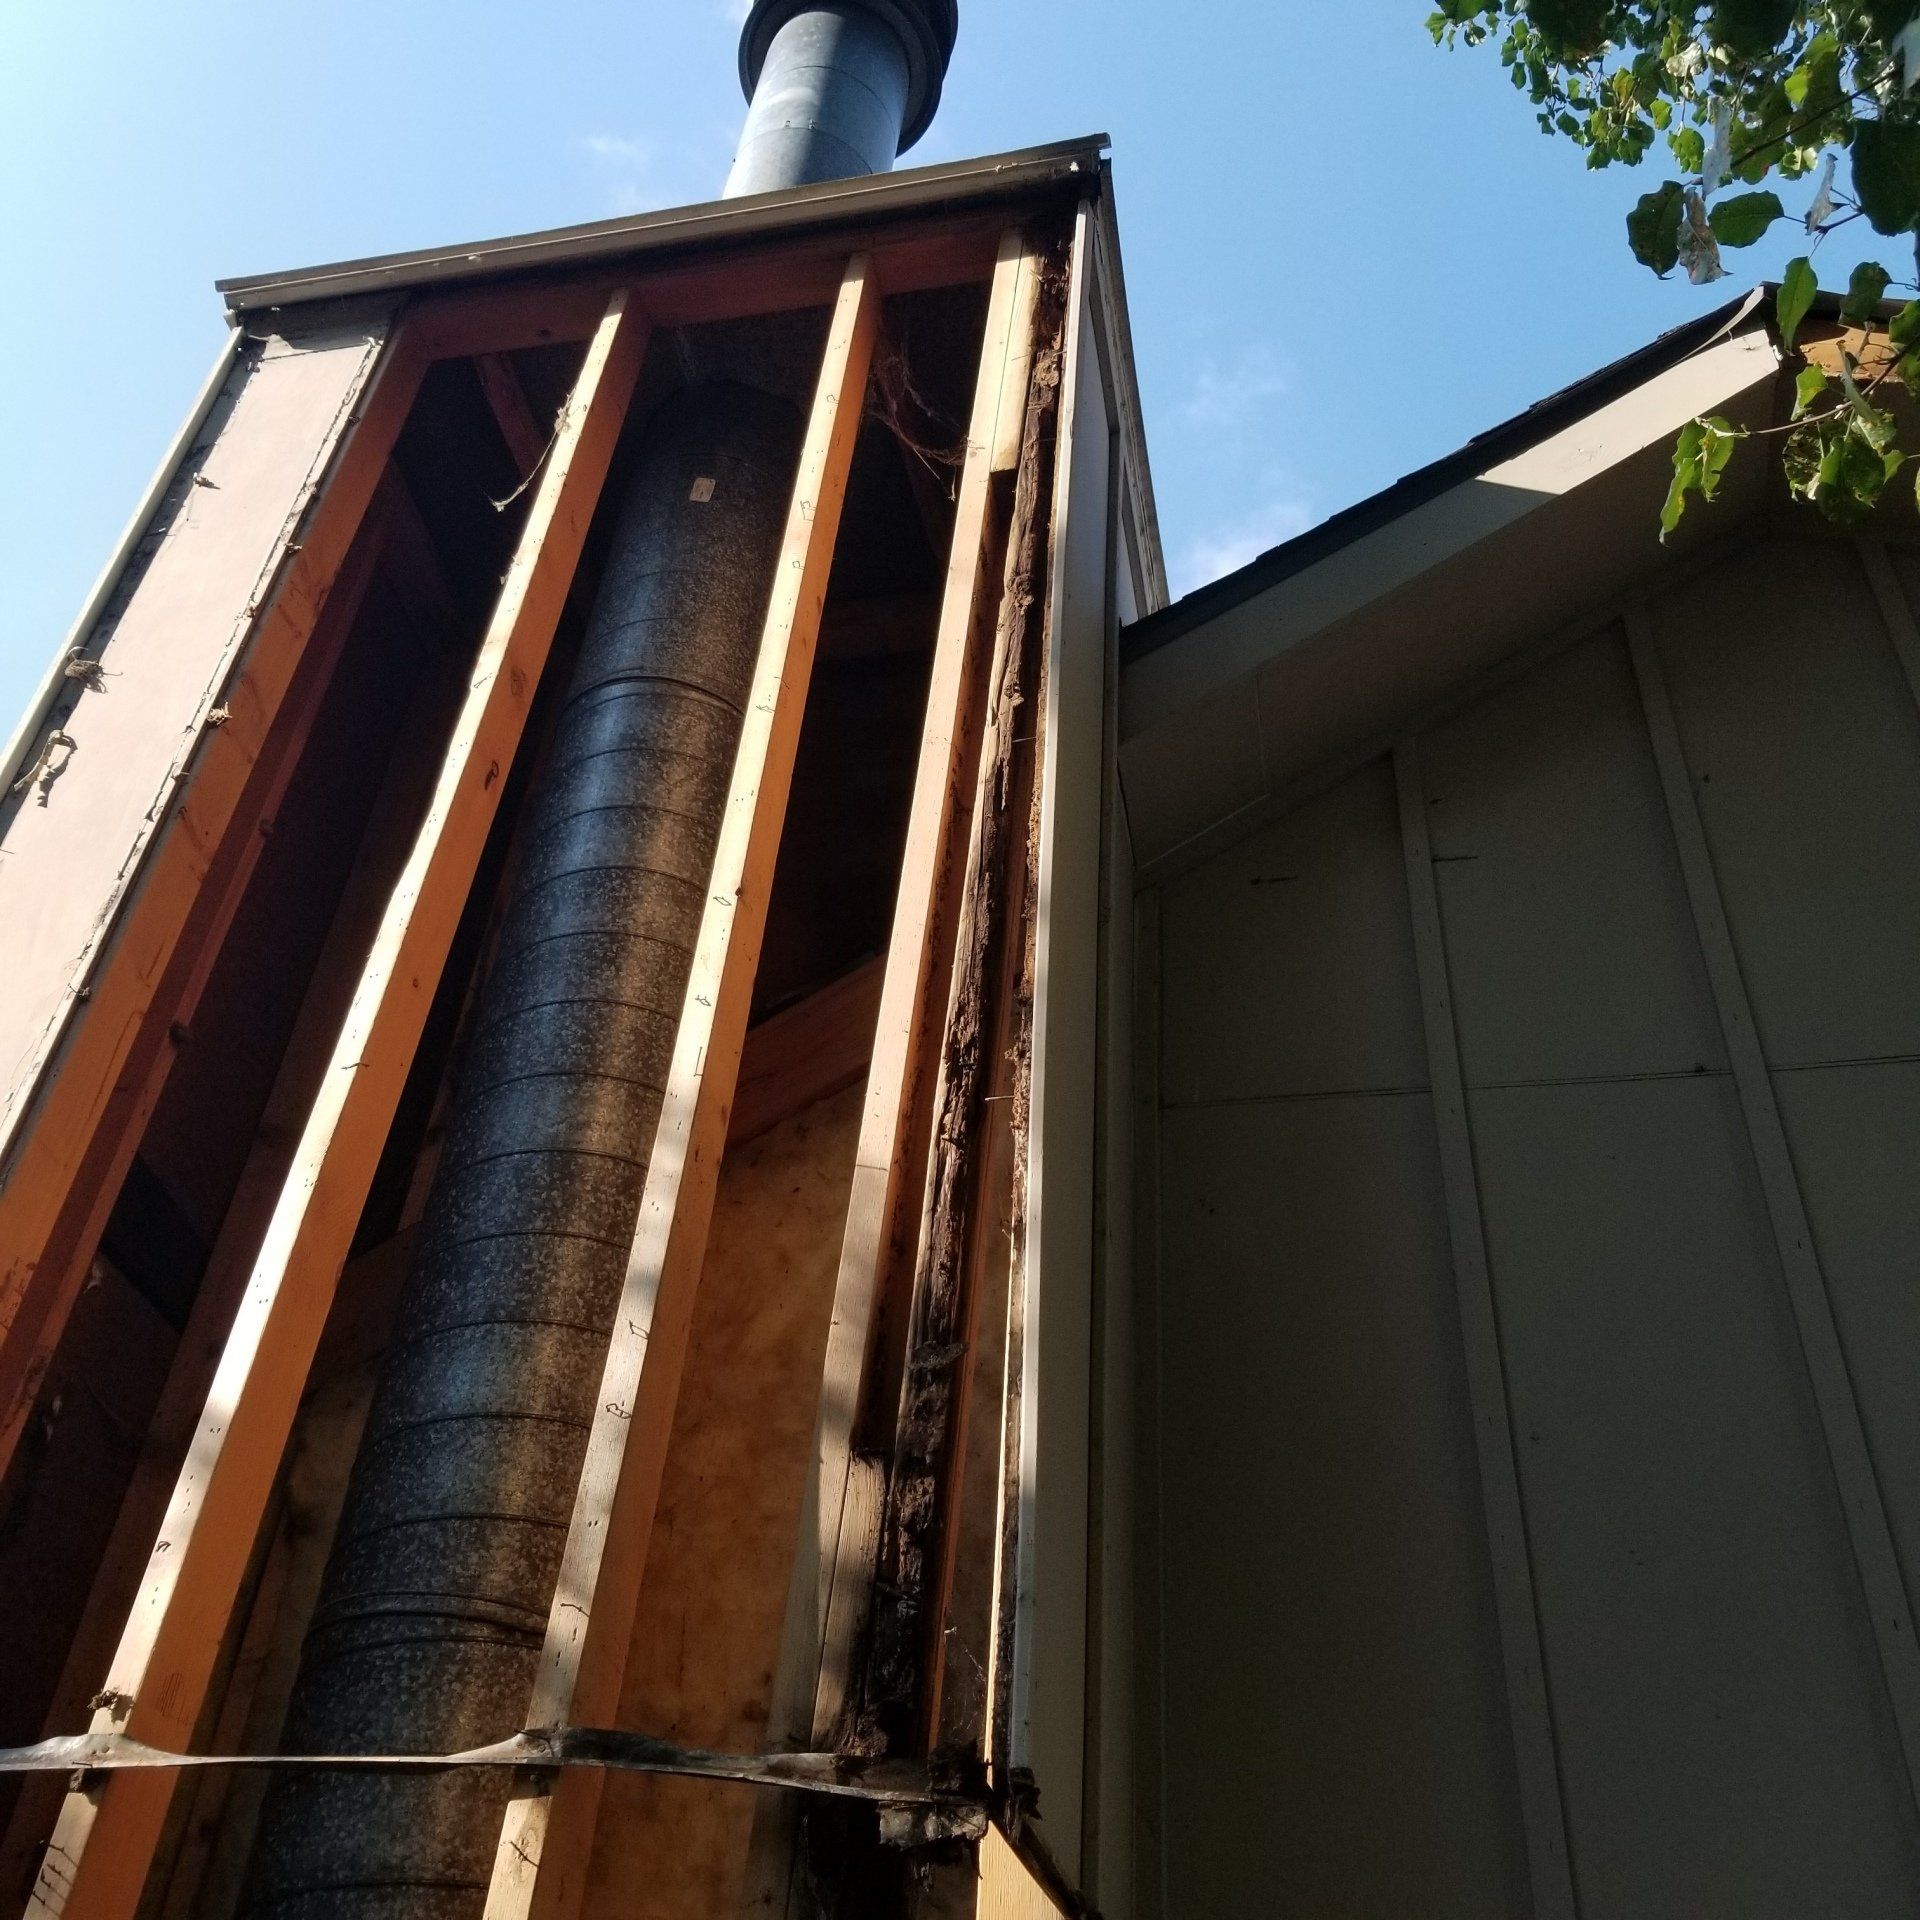 Removed siding at chimney and discovered rotted framing Olathe.